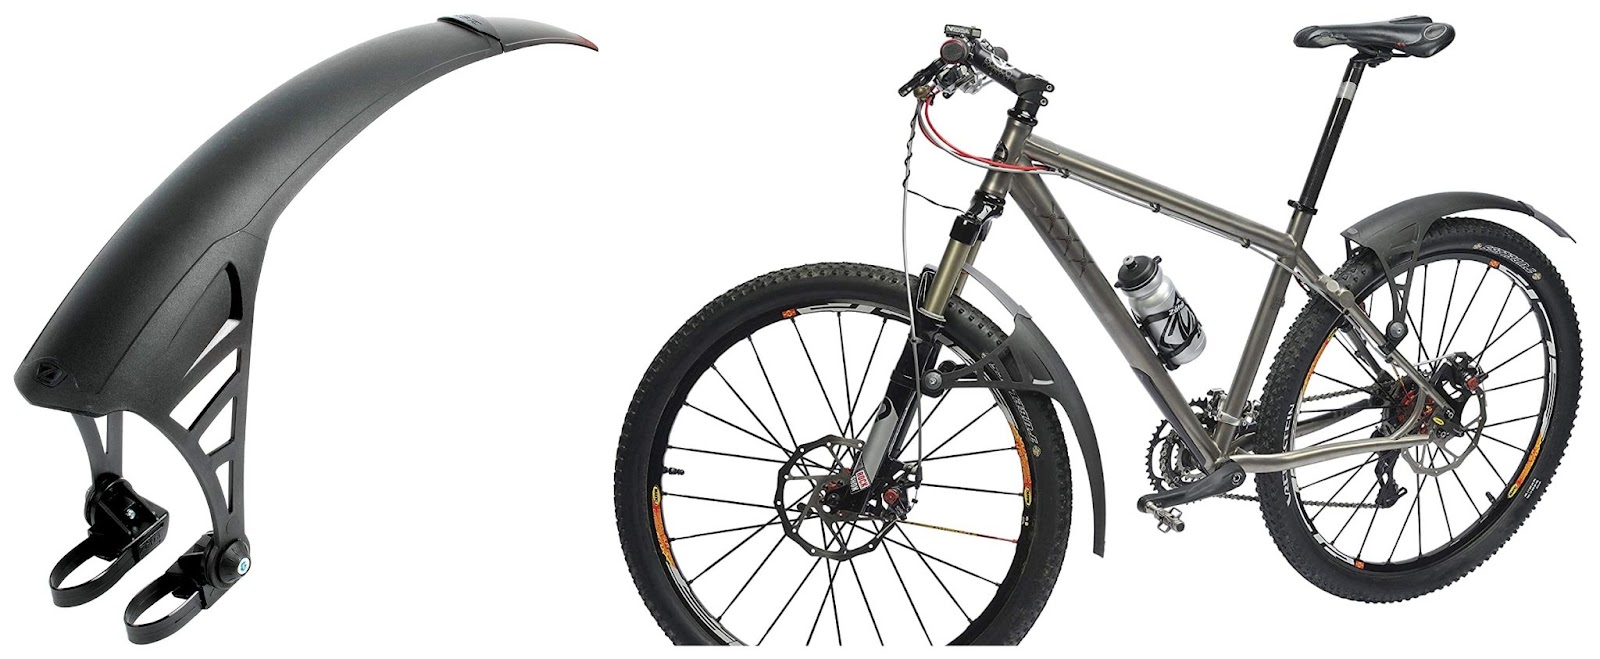 Mountain bike-style mudguards can be installed onto any tire size and onto any type of MTB frame. 